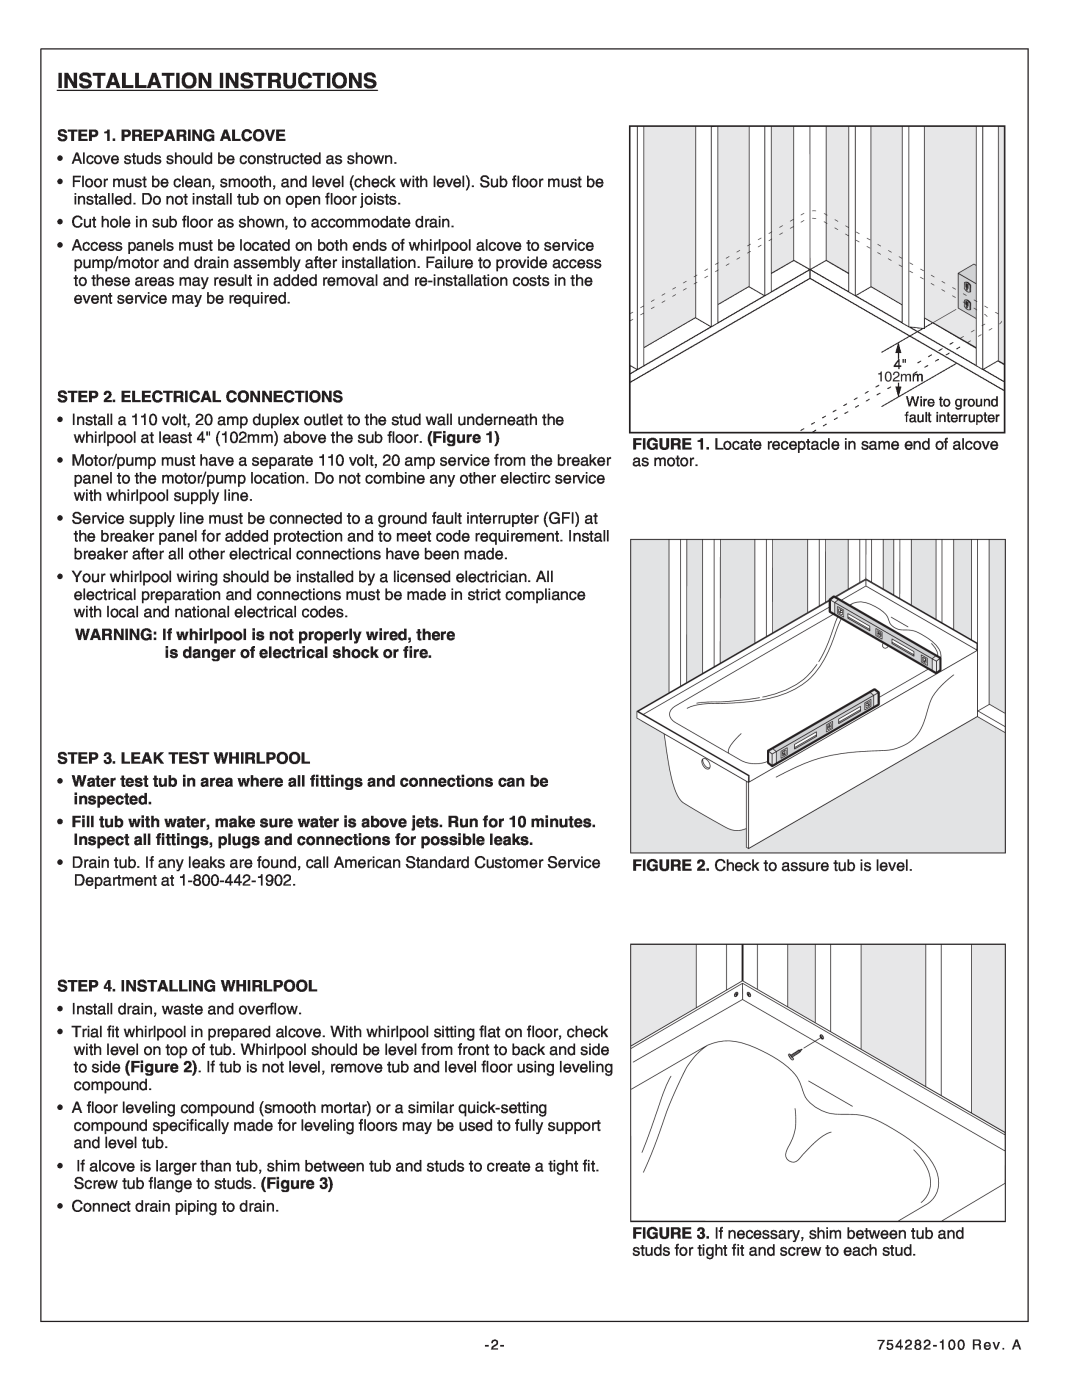 American Standard 6032Y1.218.XXX Installation Instructions, Preparing Alcove, Electrical Connections, Leak Test Whirlpool 